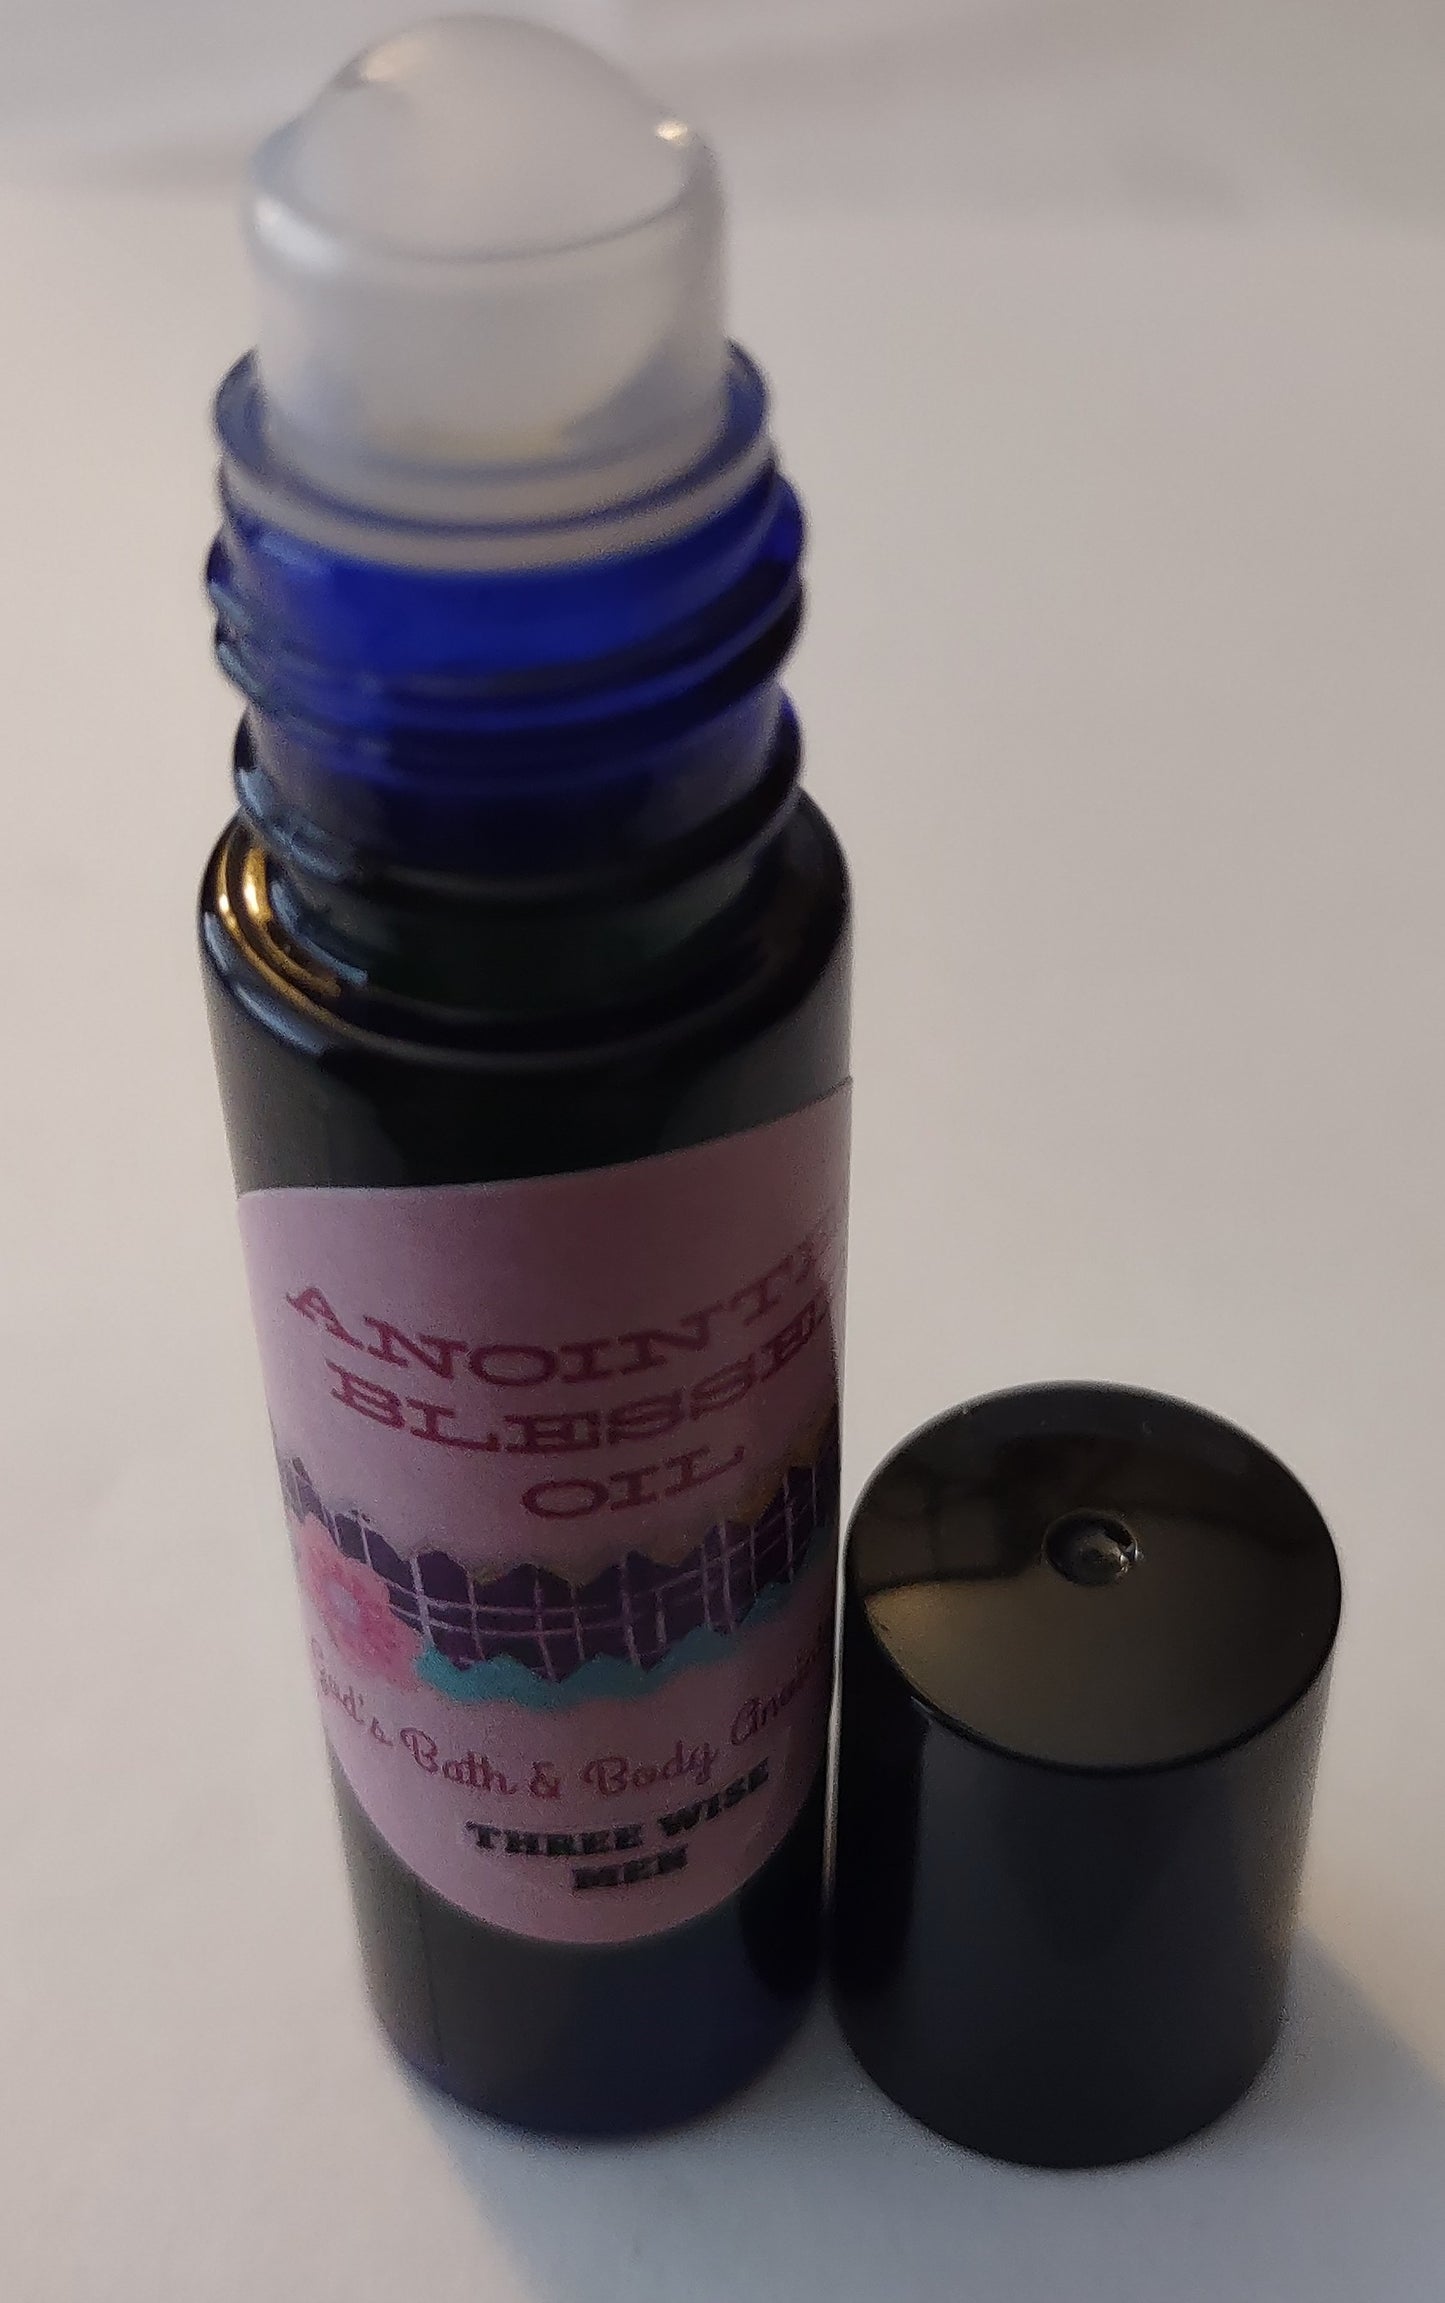 Three Wise Men anointed blessed oil - 1/3oz roll-on bottle